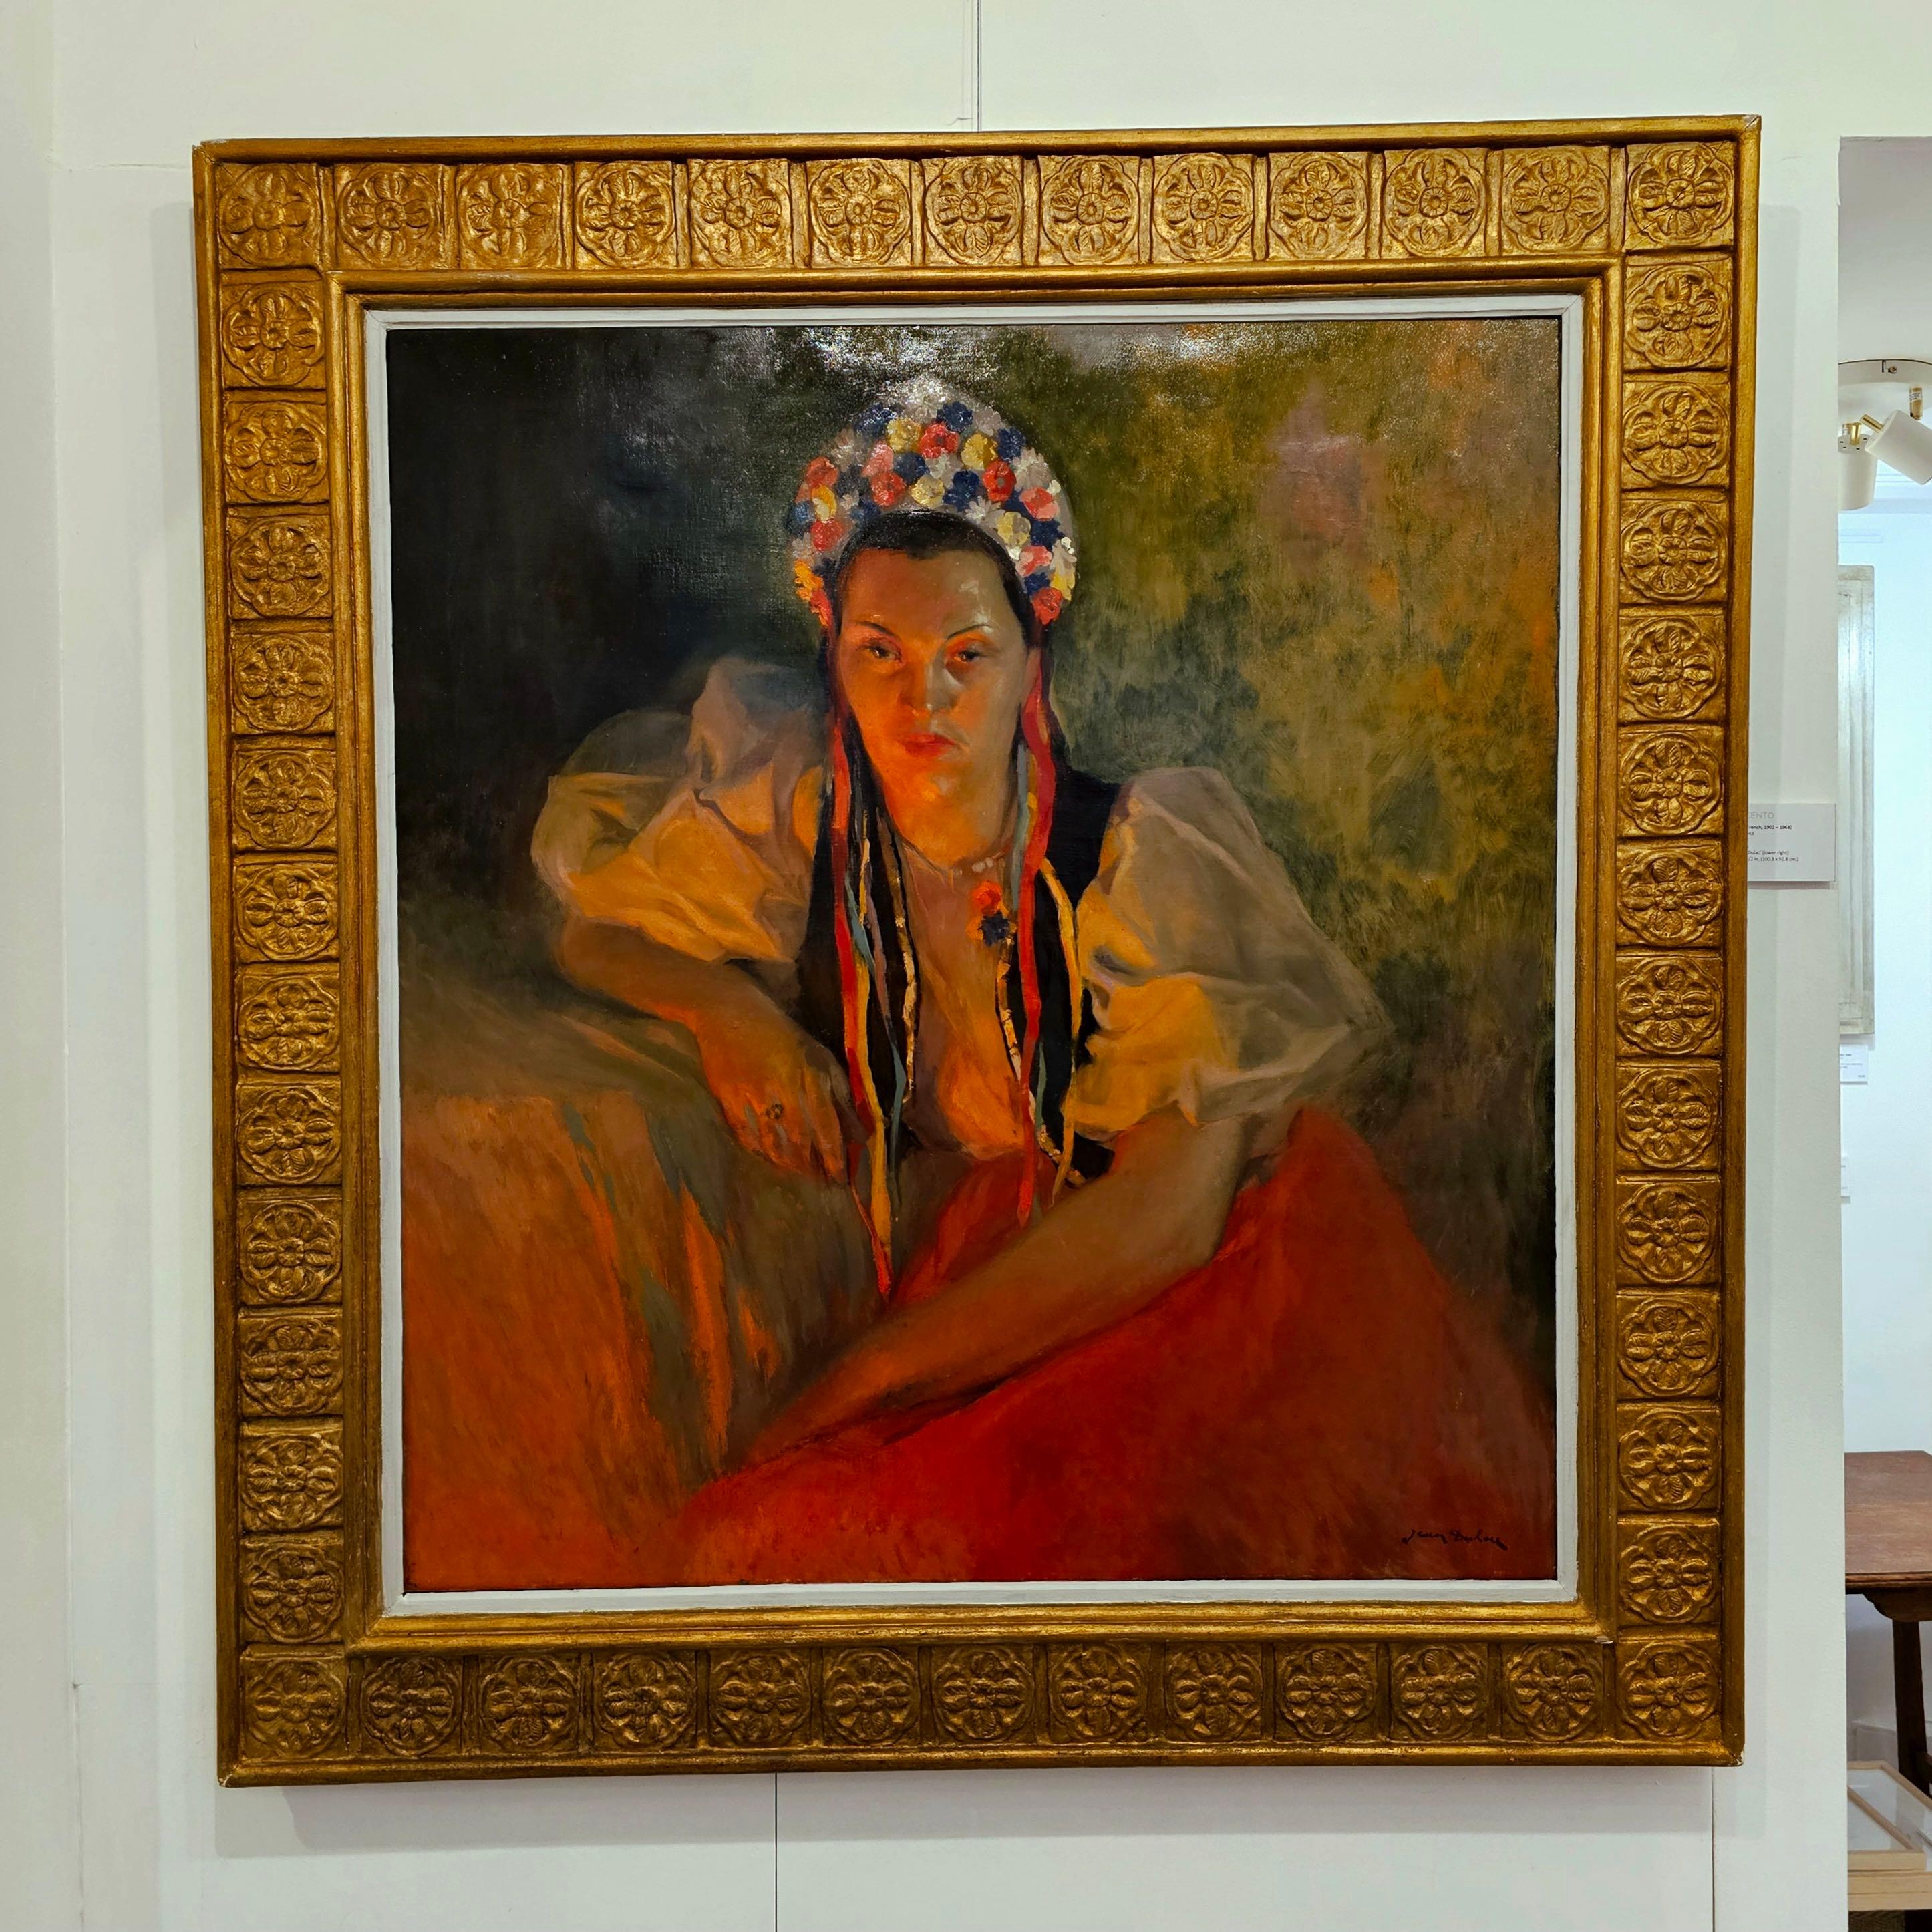 A very engaging and expansive oil painting by the Lyonnaise artist Jean Dulac.  The oil painting, painted in 1943 portrays a beautiful lady pensively looking out past the viewer while adorned in traditional French costume. The use of red and ochre